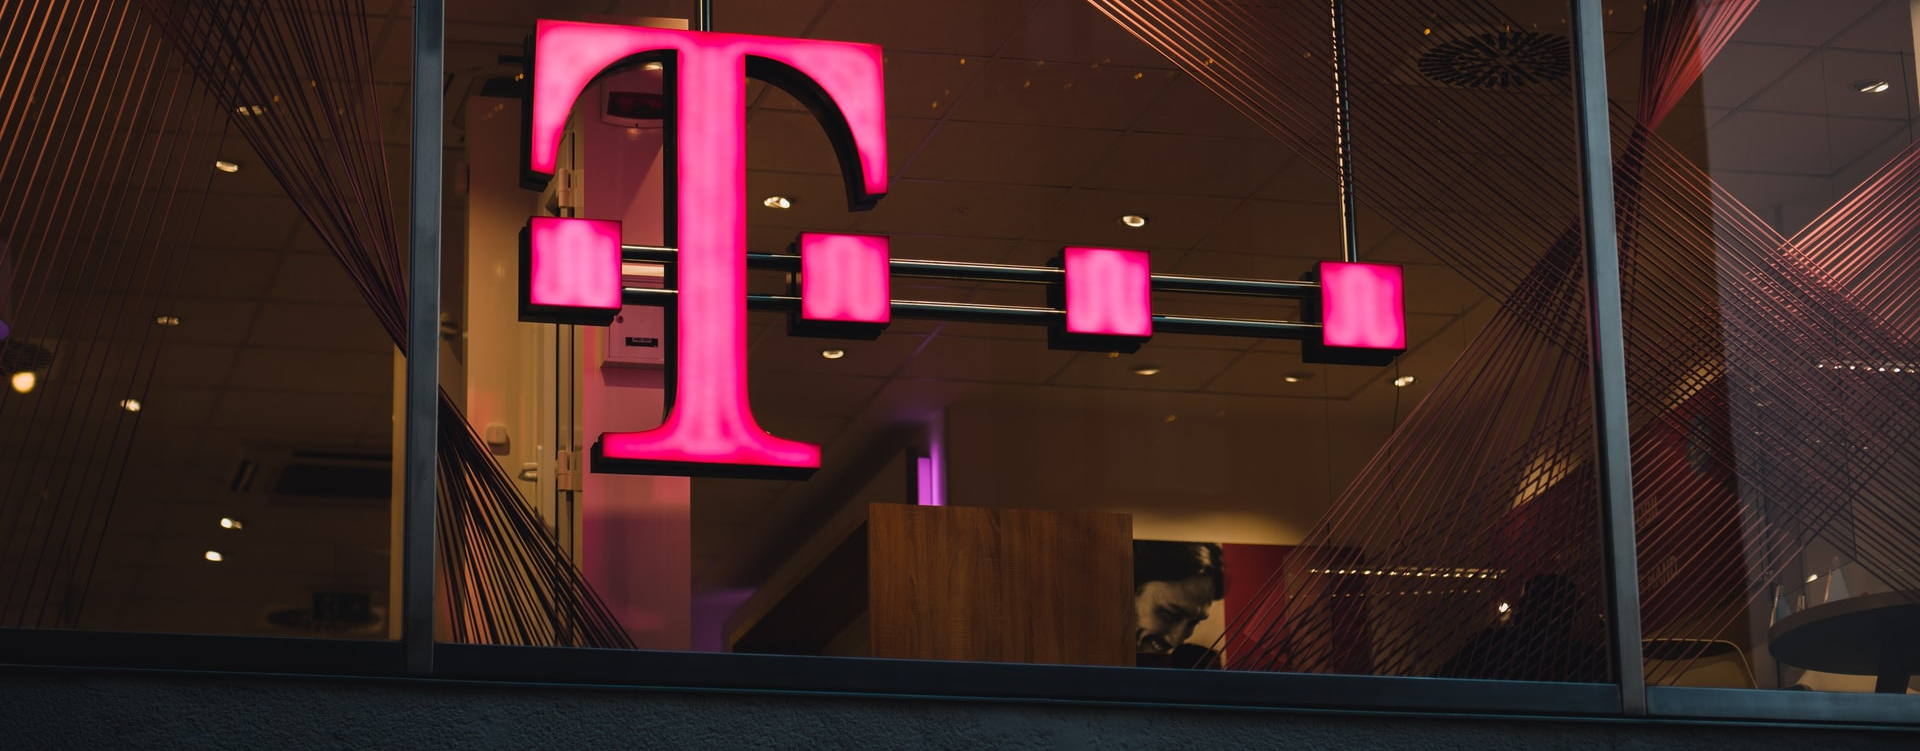 T-Mobile extends loyalty program to Metro by T-Mobile customers.